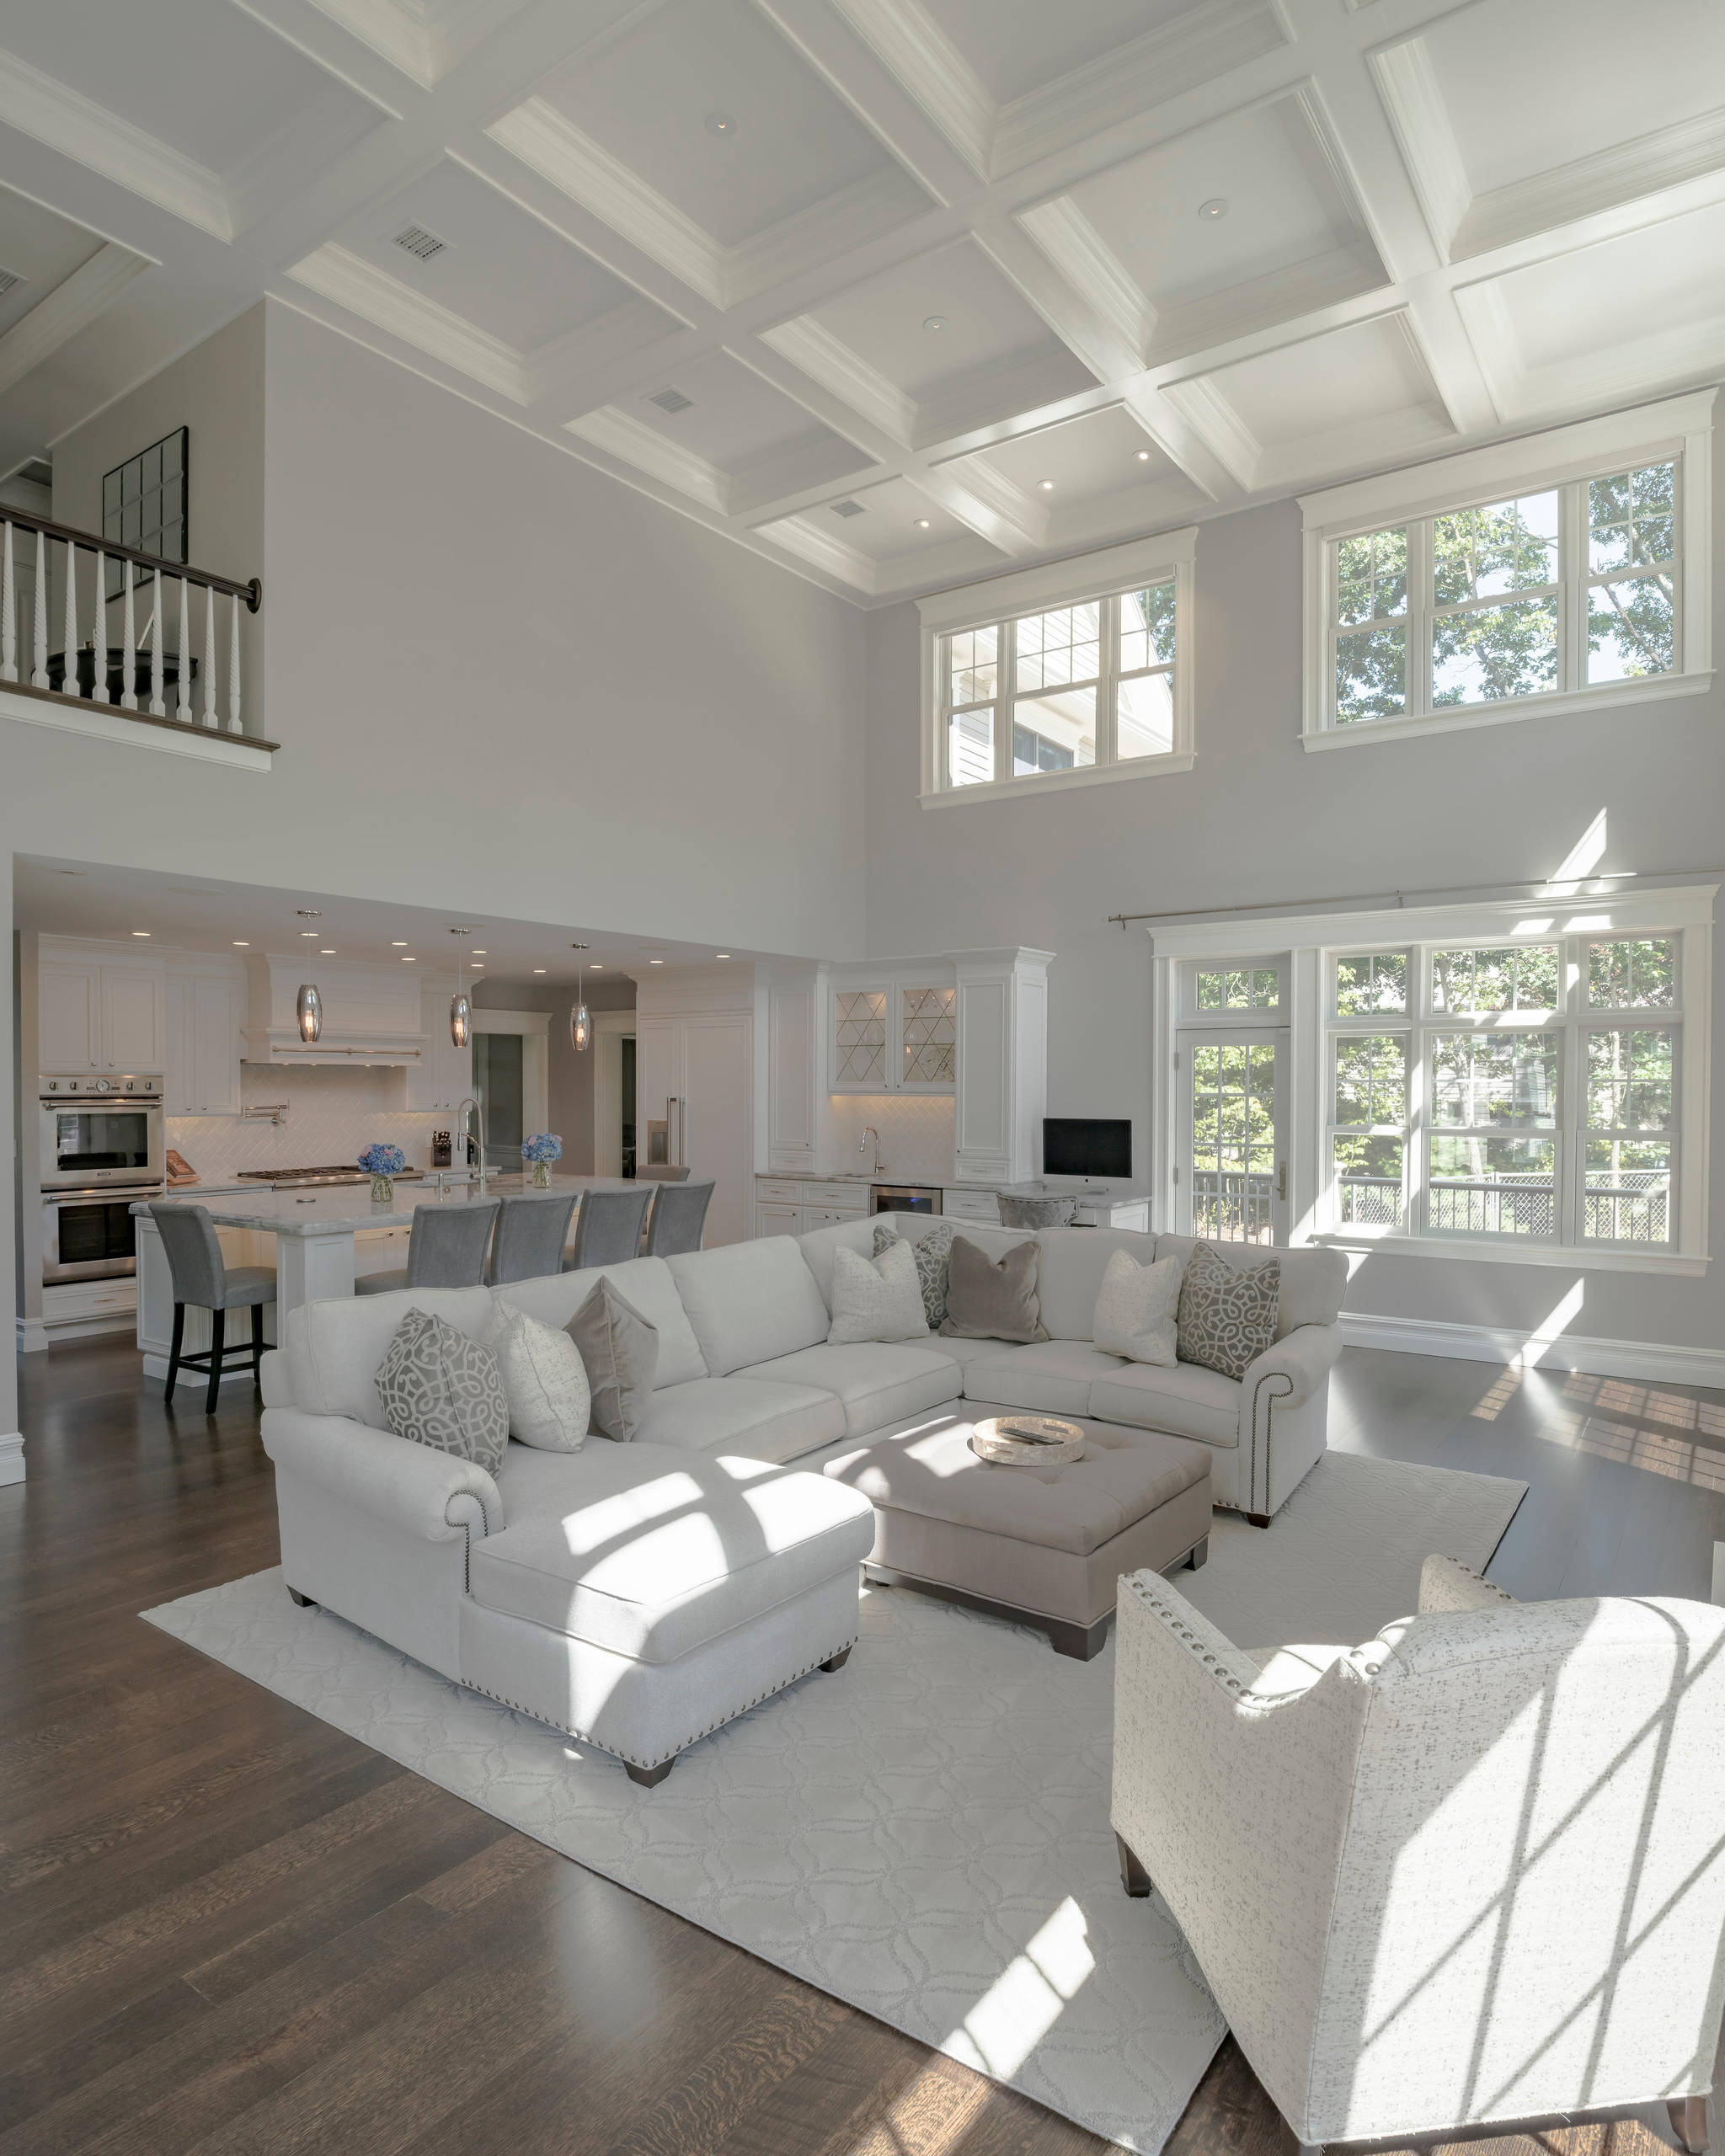 75 Beautiful Modern Living Room Pictures Ideas February 2021 Houzz